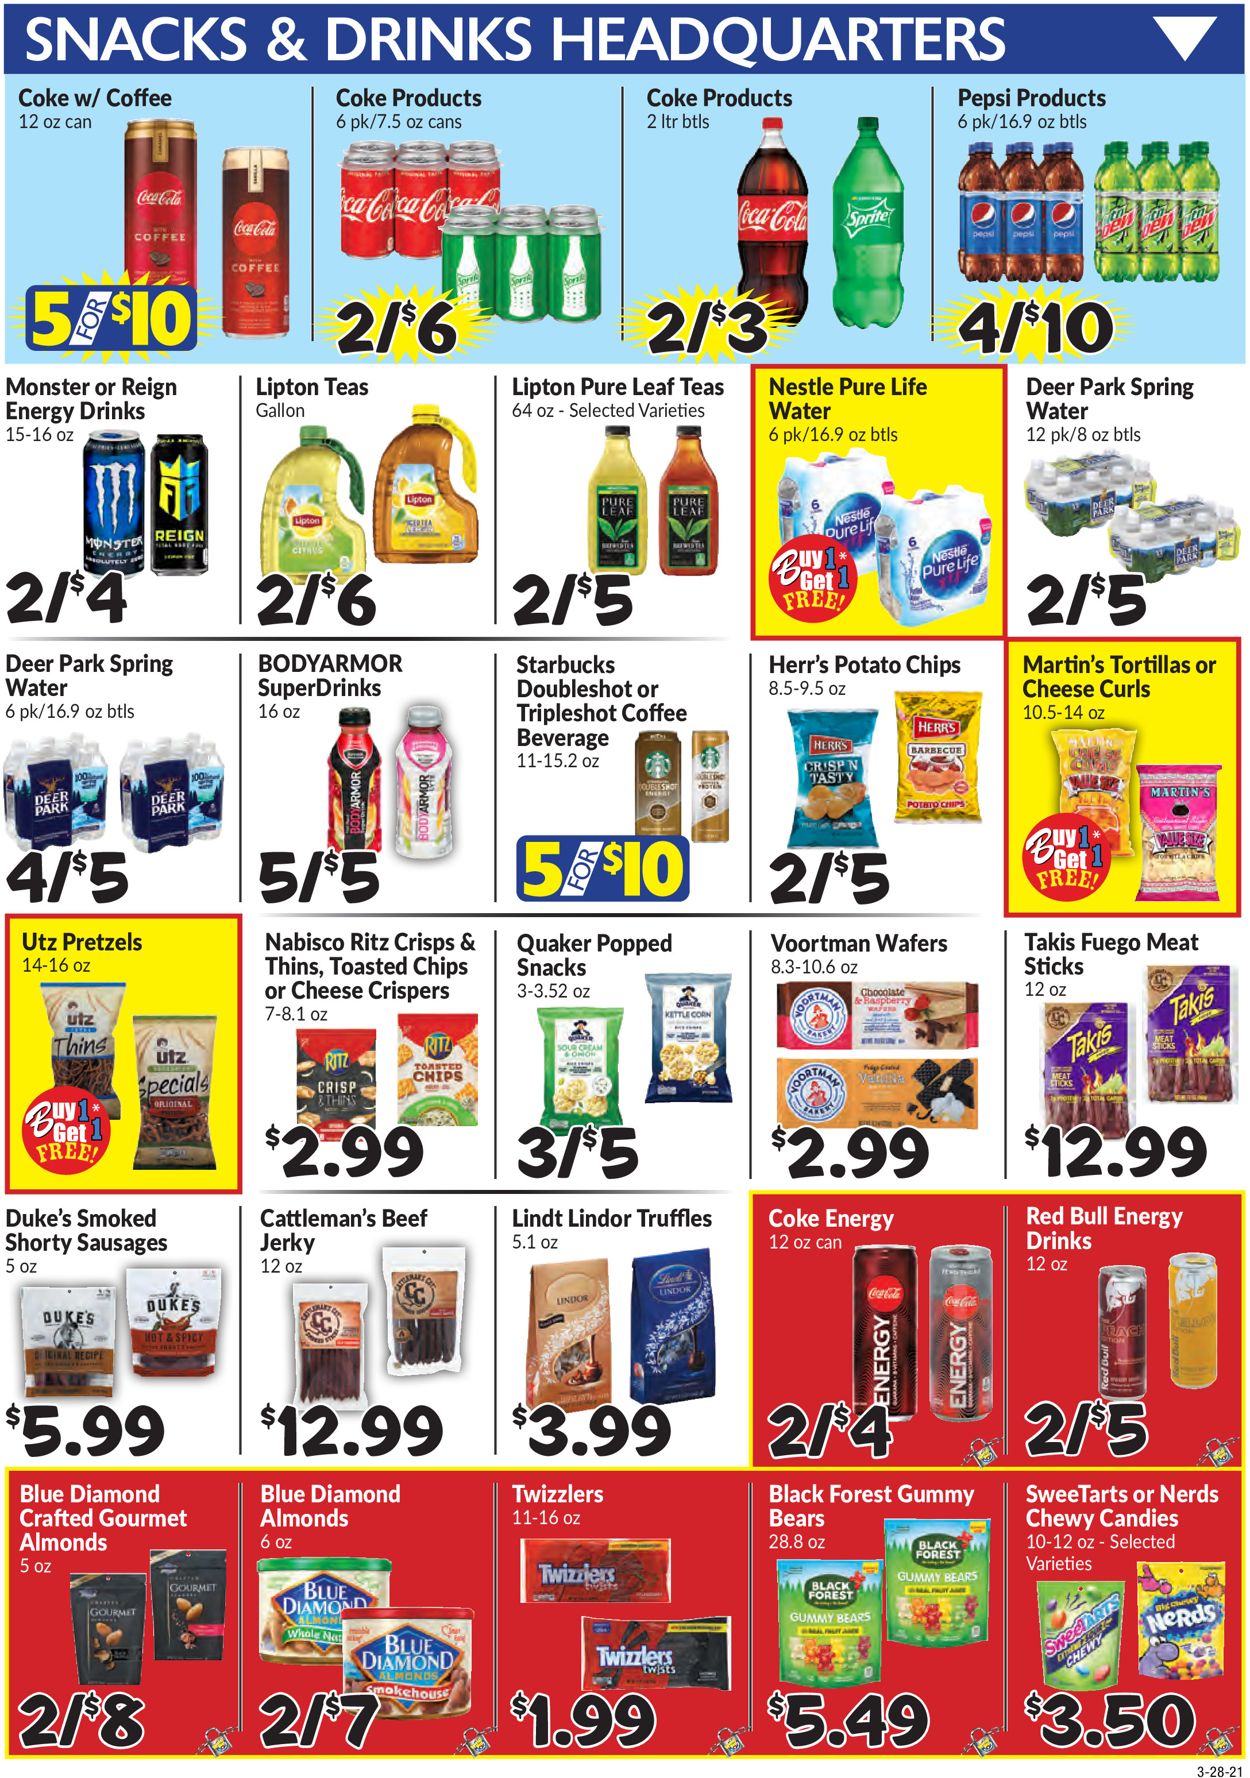 Boyer's Food Markets - Easter 2021 ad Weekly Ad Circular - valid 03/28-04/03/2021 (Page 8)